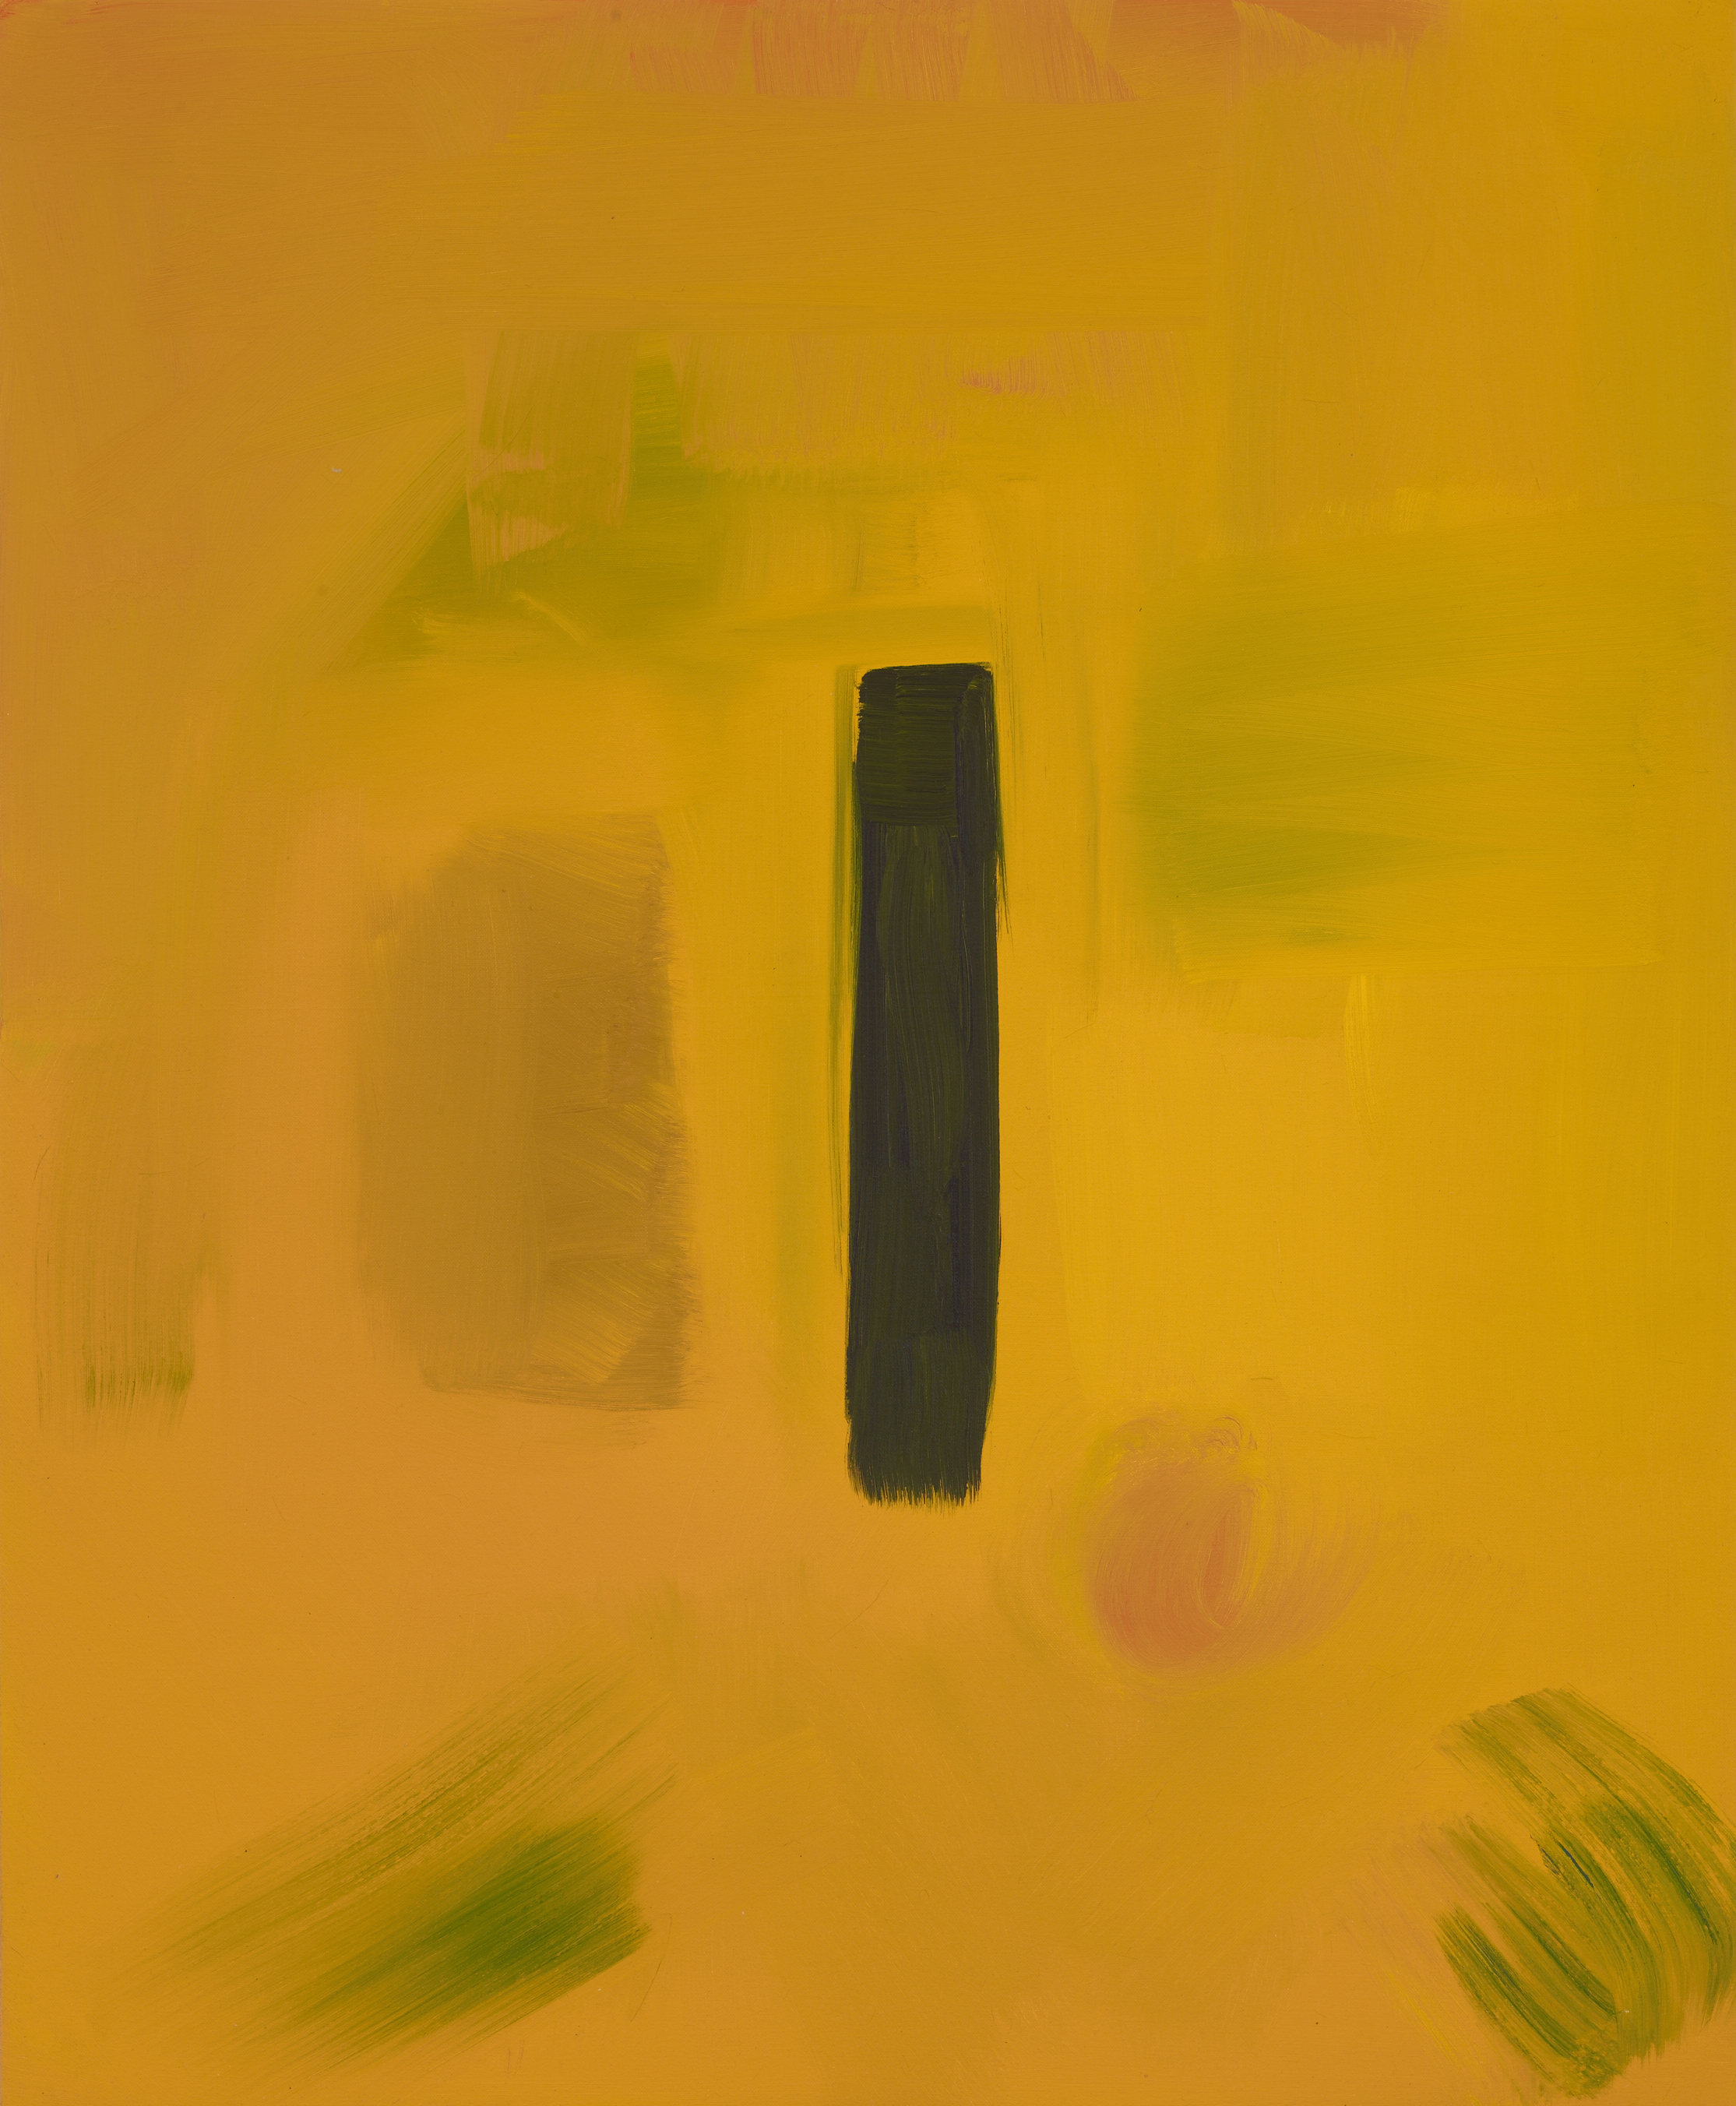 Blowing Hard, 1989-90, oil on canvas, 34 x 28 inches